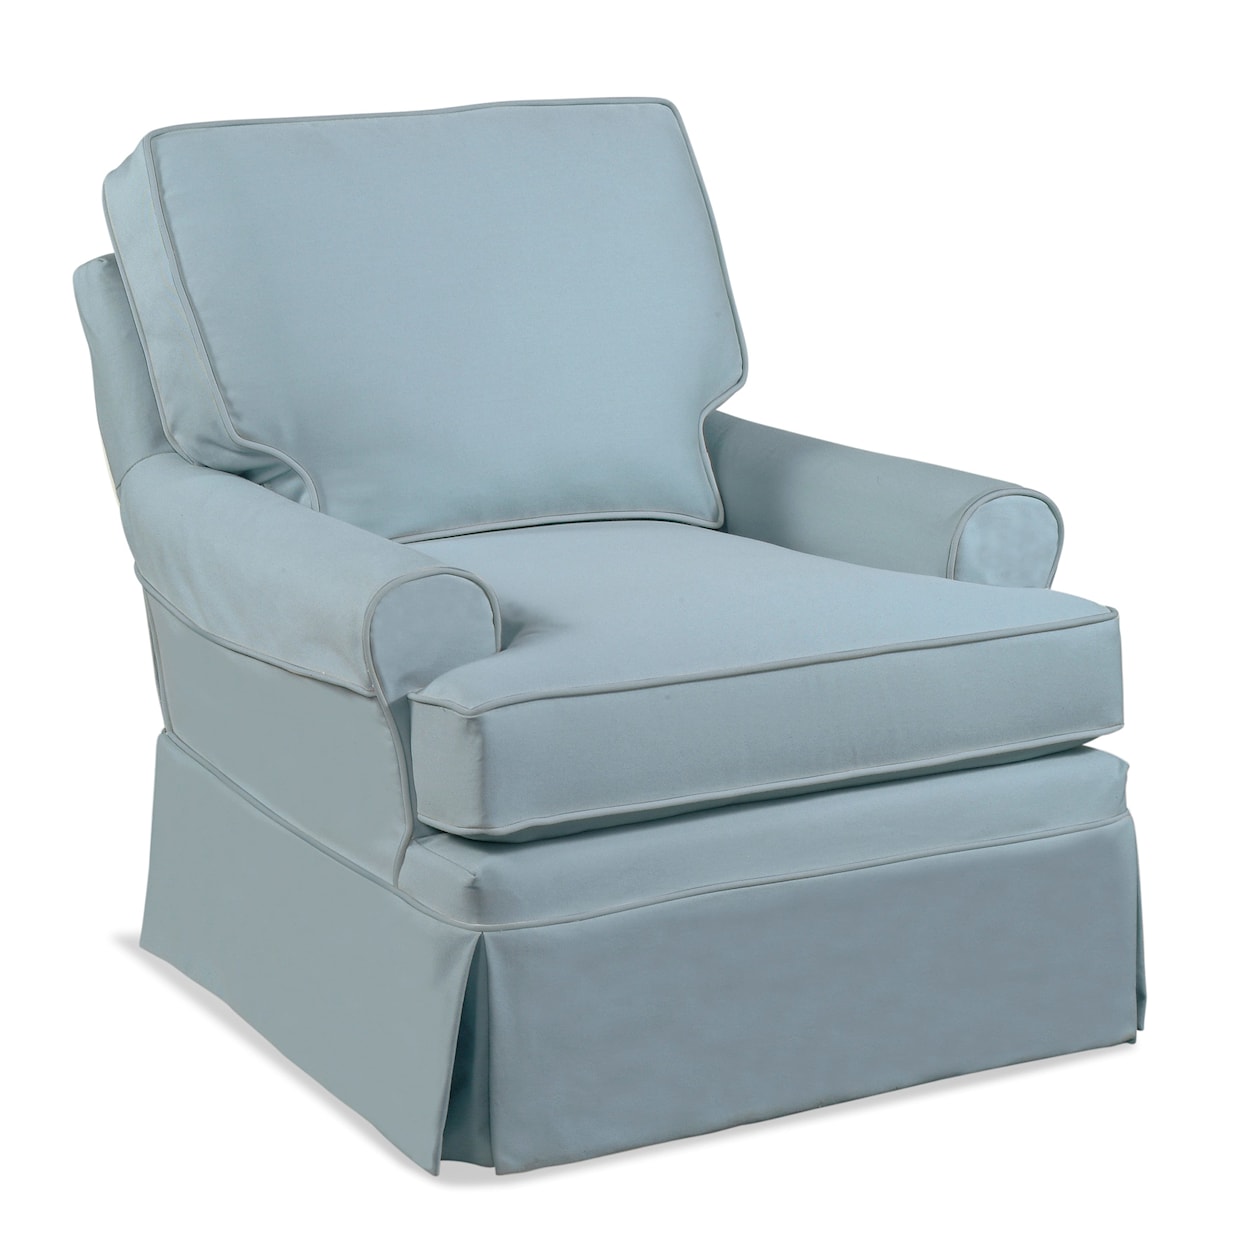 Braxton Culler Belmont Chair with Slipcover